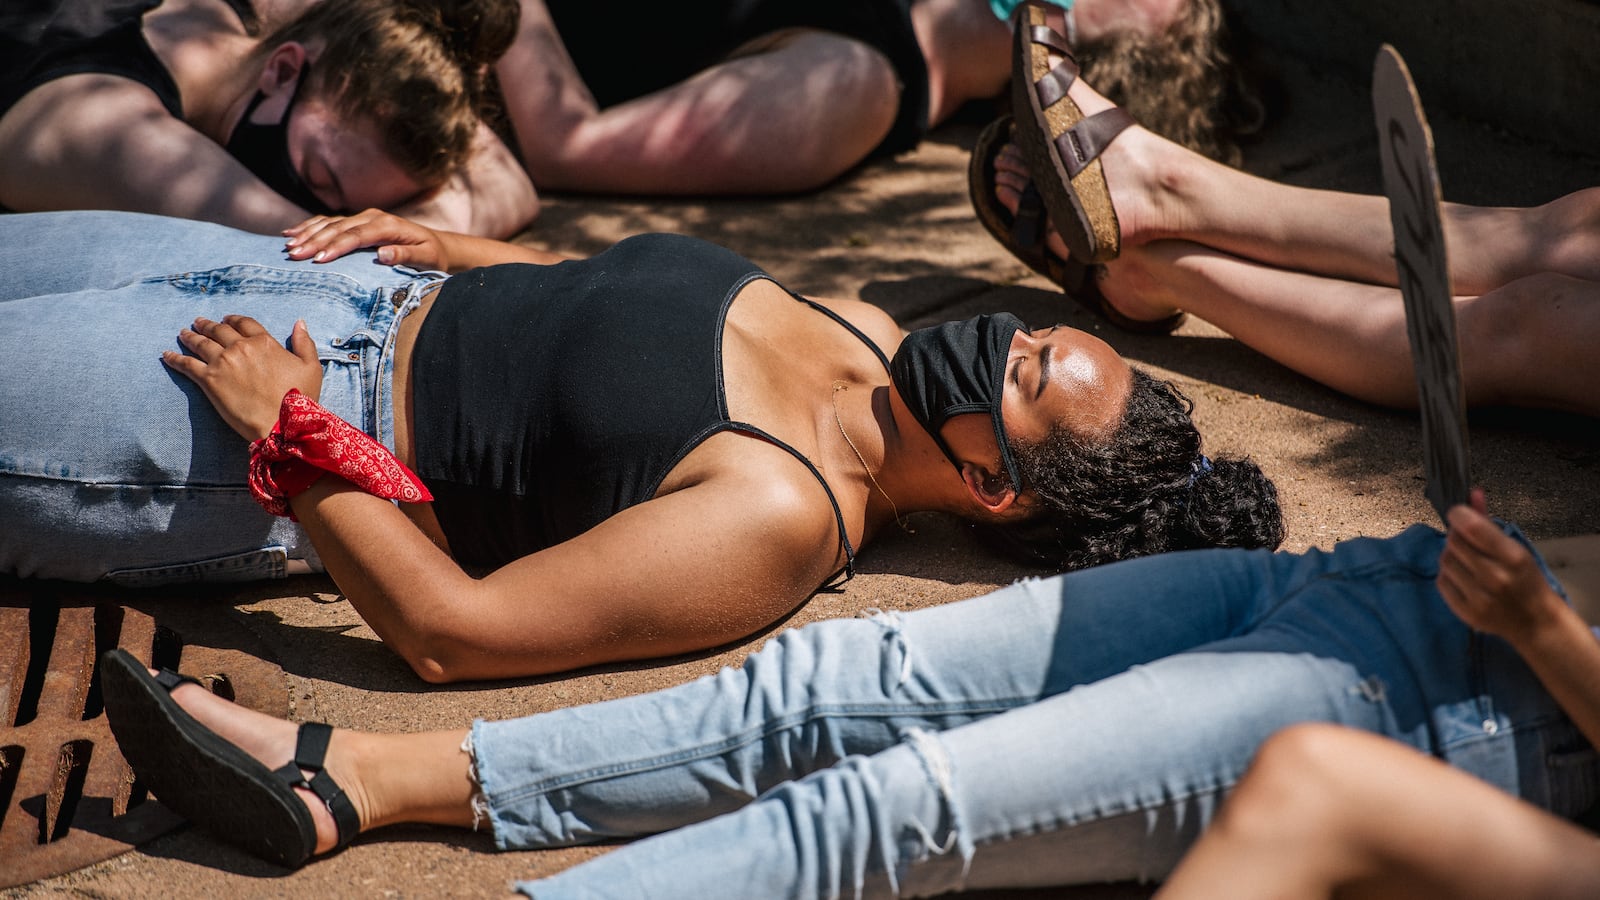 A group of young students lie on the ground during a die-in protest. The young woman in the center is wearing blue jeans, a black tank top and a red scarf on her arm. Other students’ limbs are all around her.